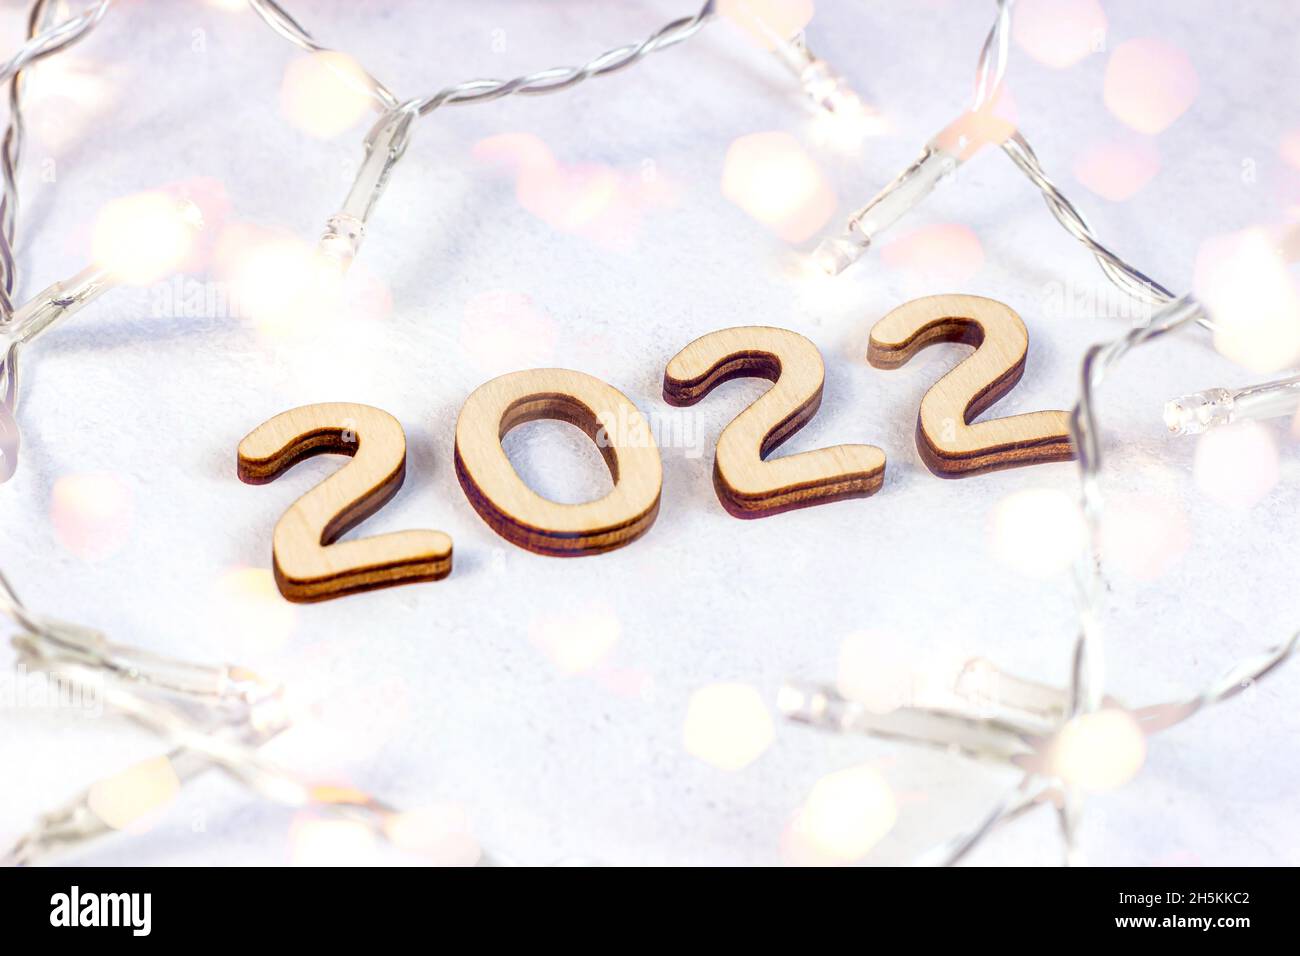 Wooden numbers 2022 silhouette with Christmas lights on light background. New Year beginning congratulations and planning concept. Stock Photo